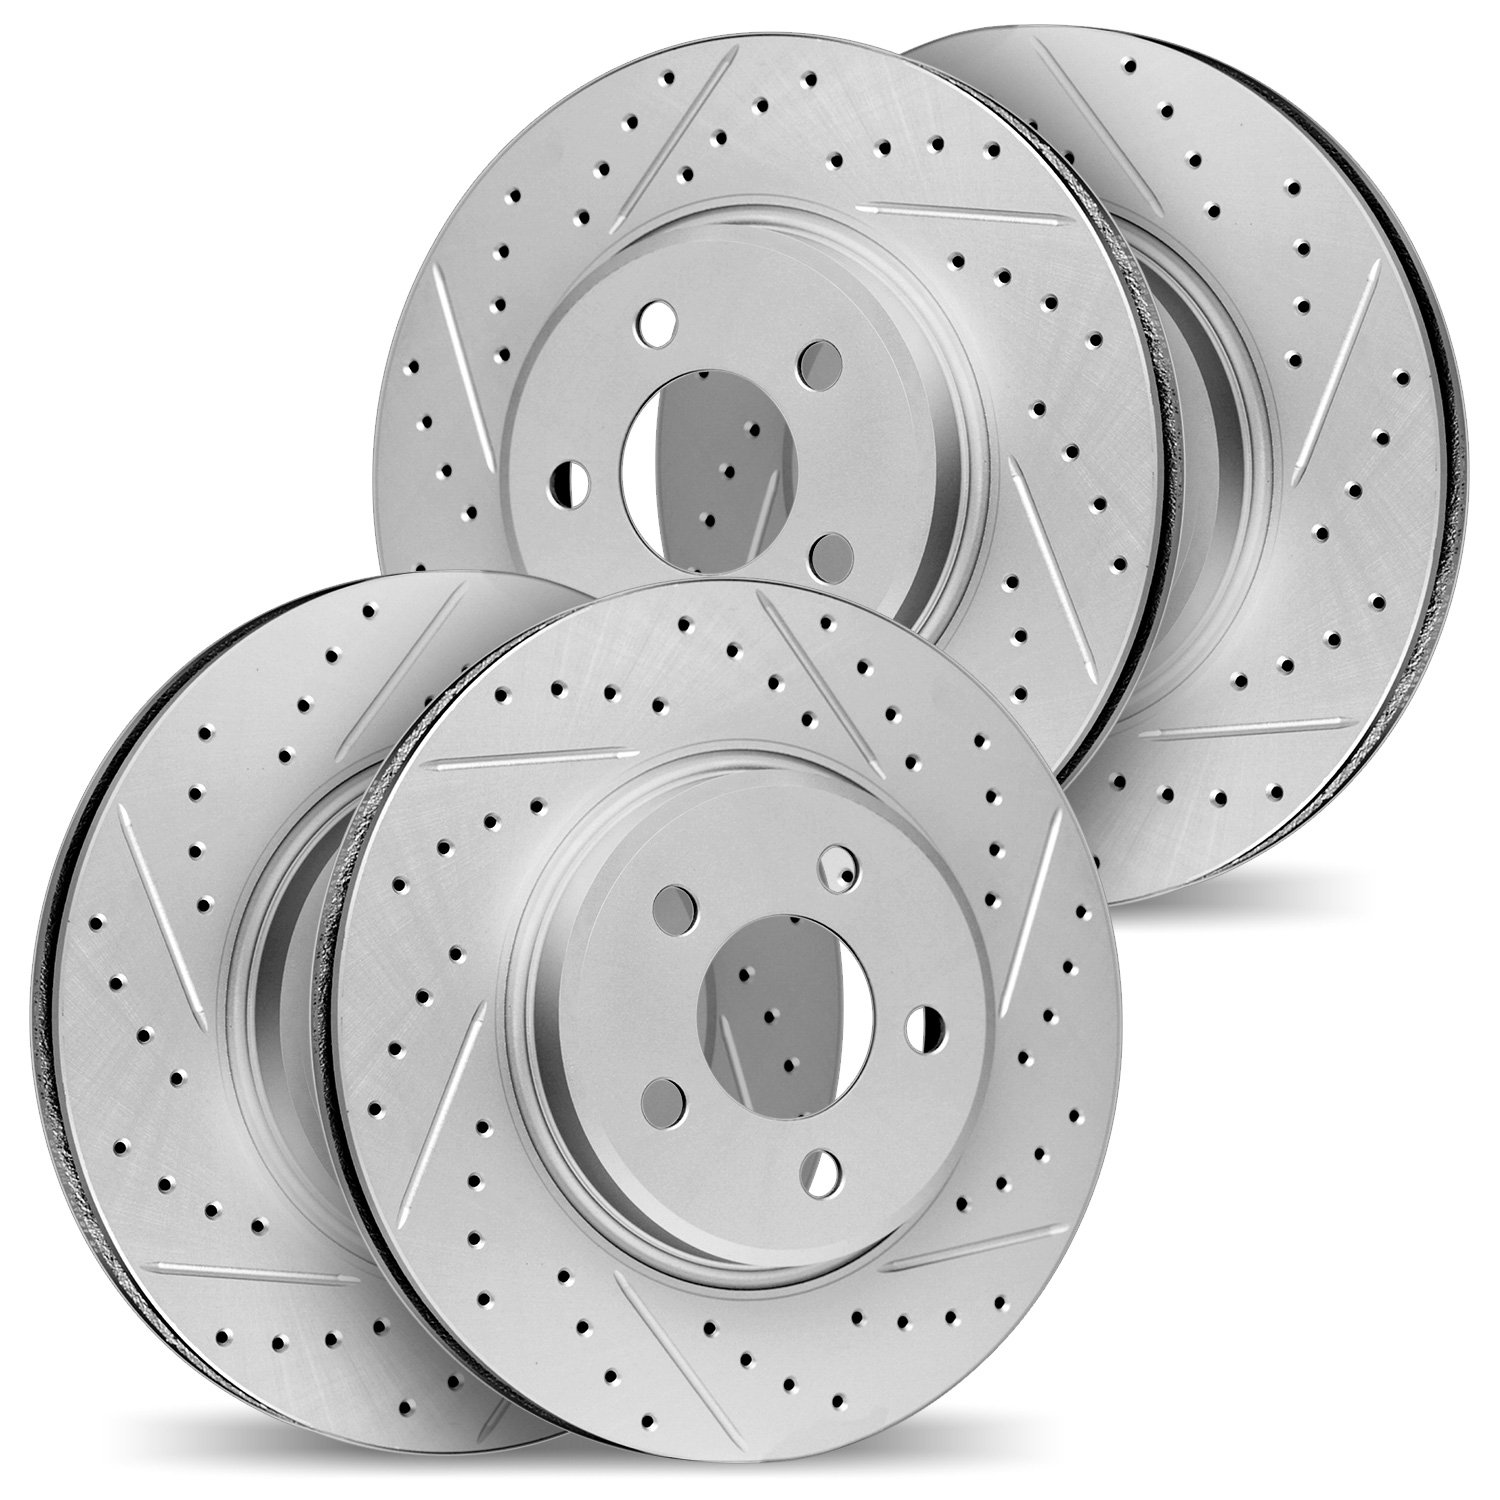 2004-31056 Geoperformance Drilled/Slotted Brake Rotors, Fits Select Multiple Makes/Models, Position: Front and Rear